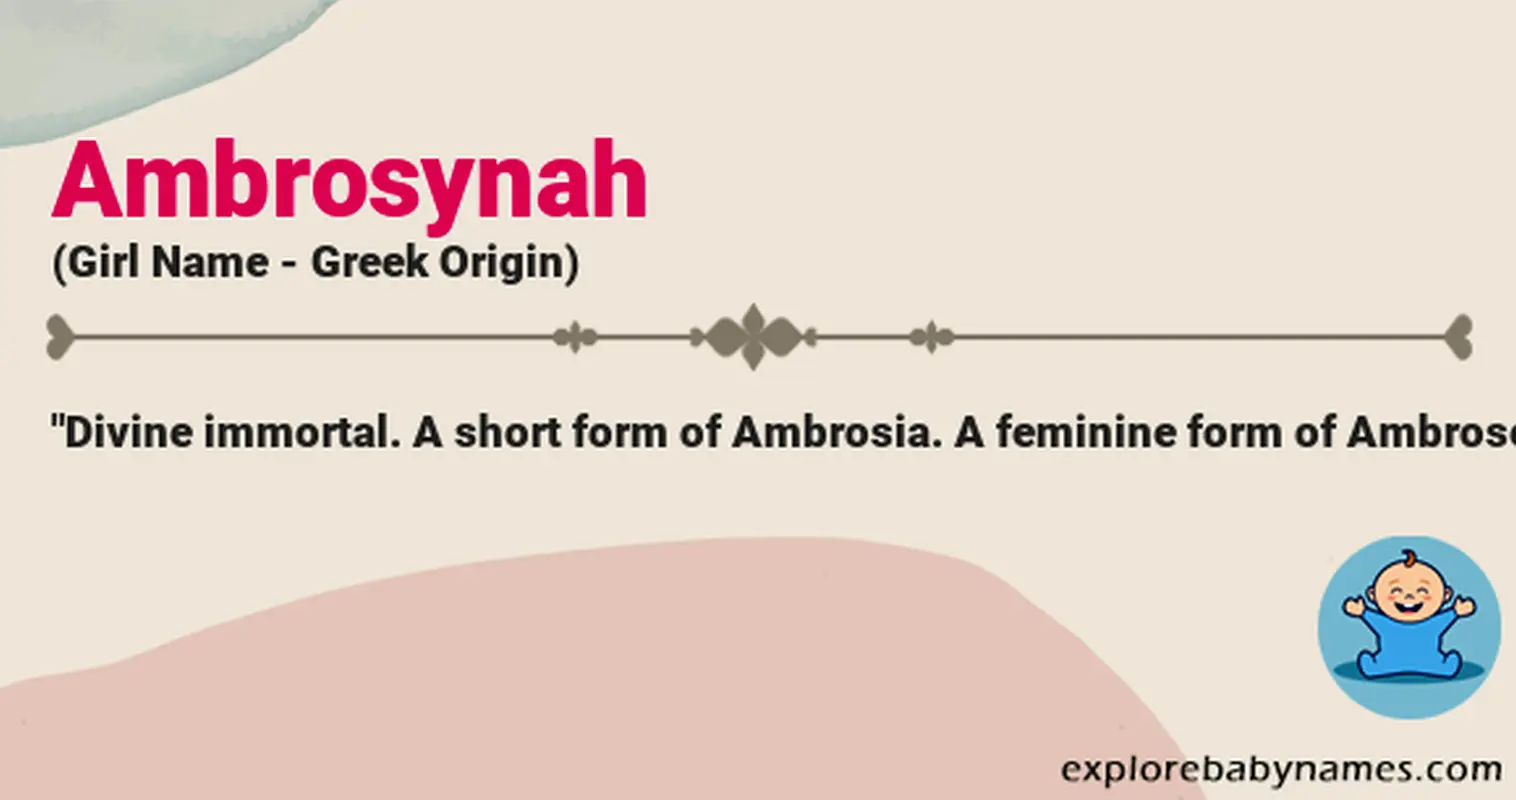 Meaning of Ambrosynah